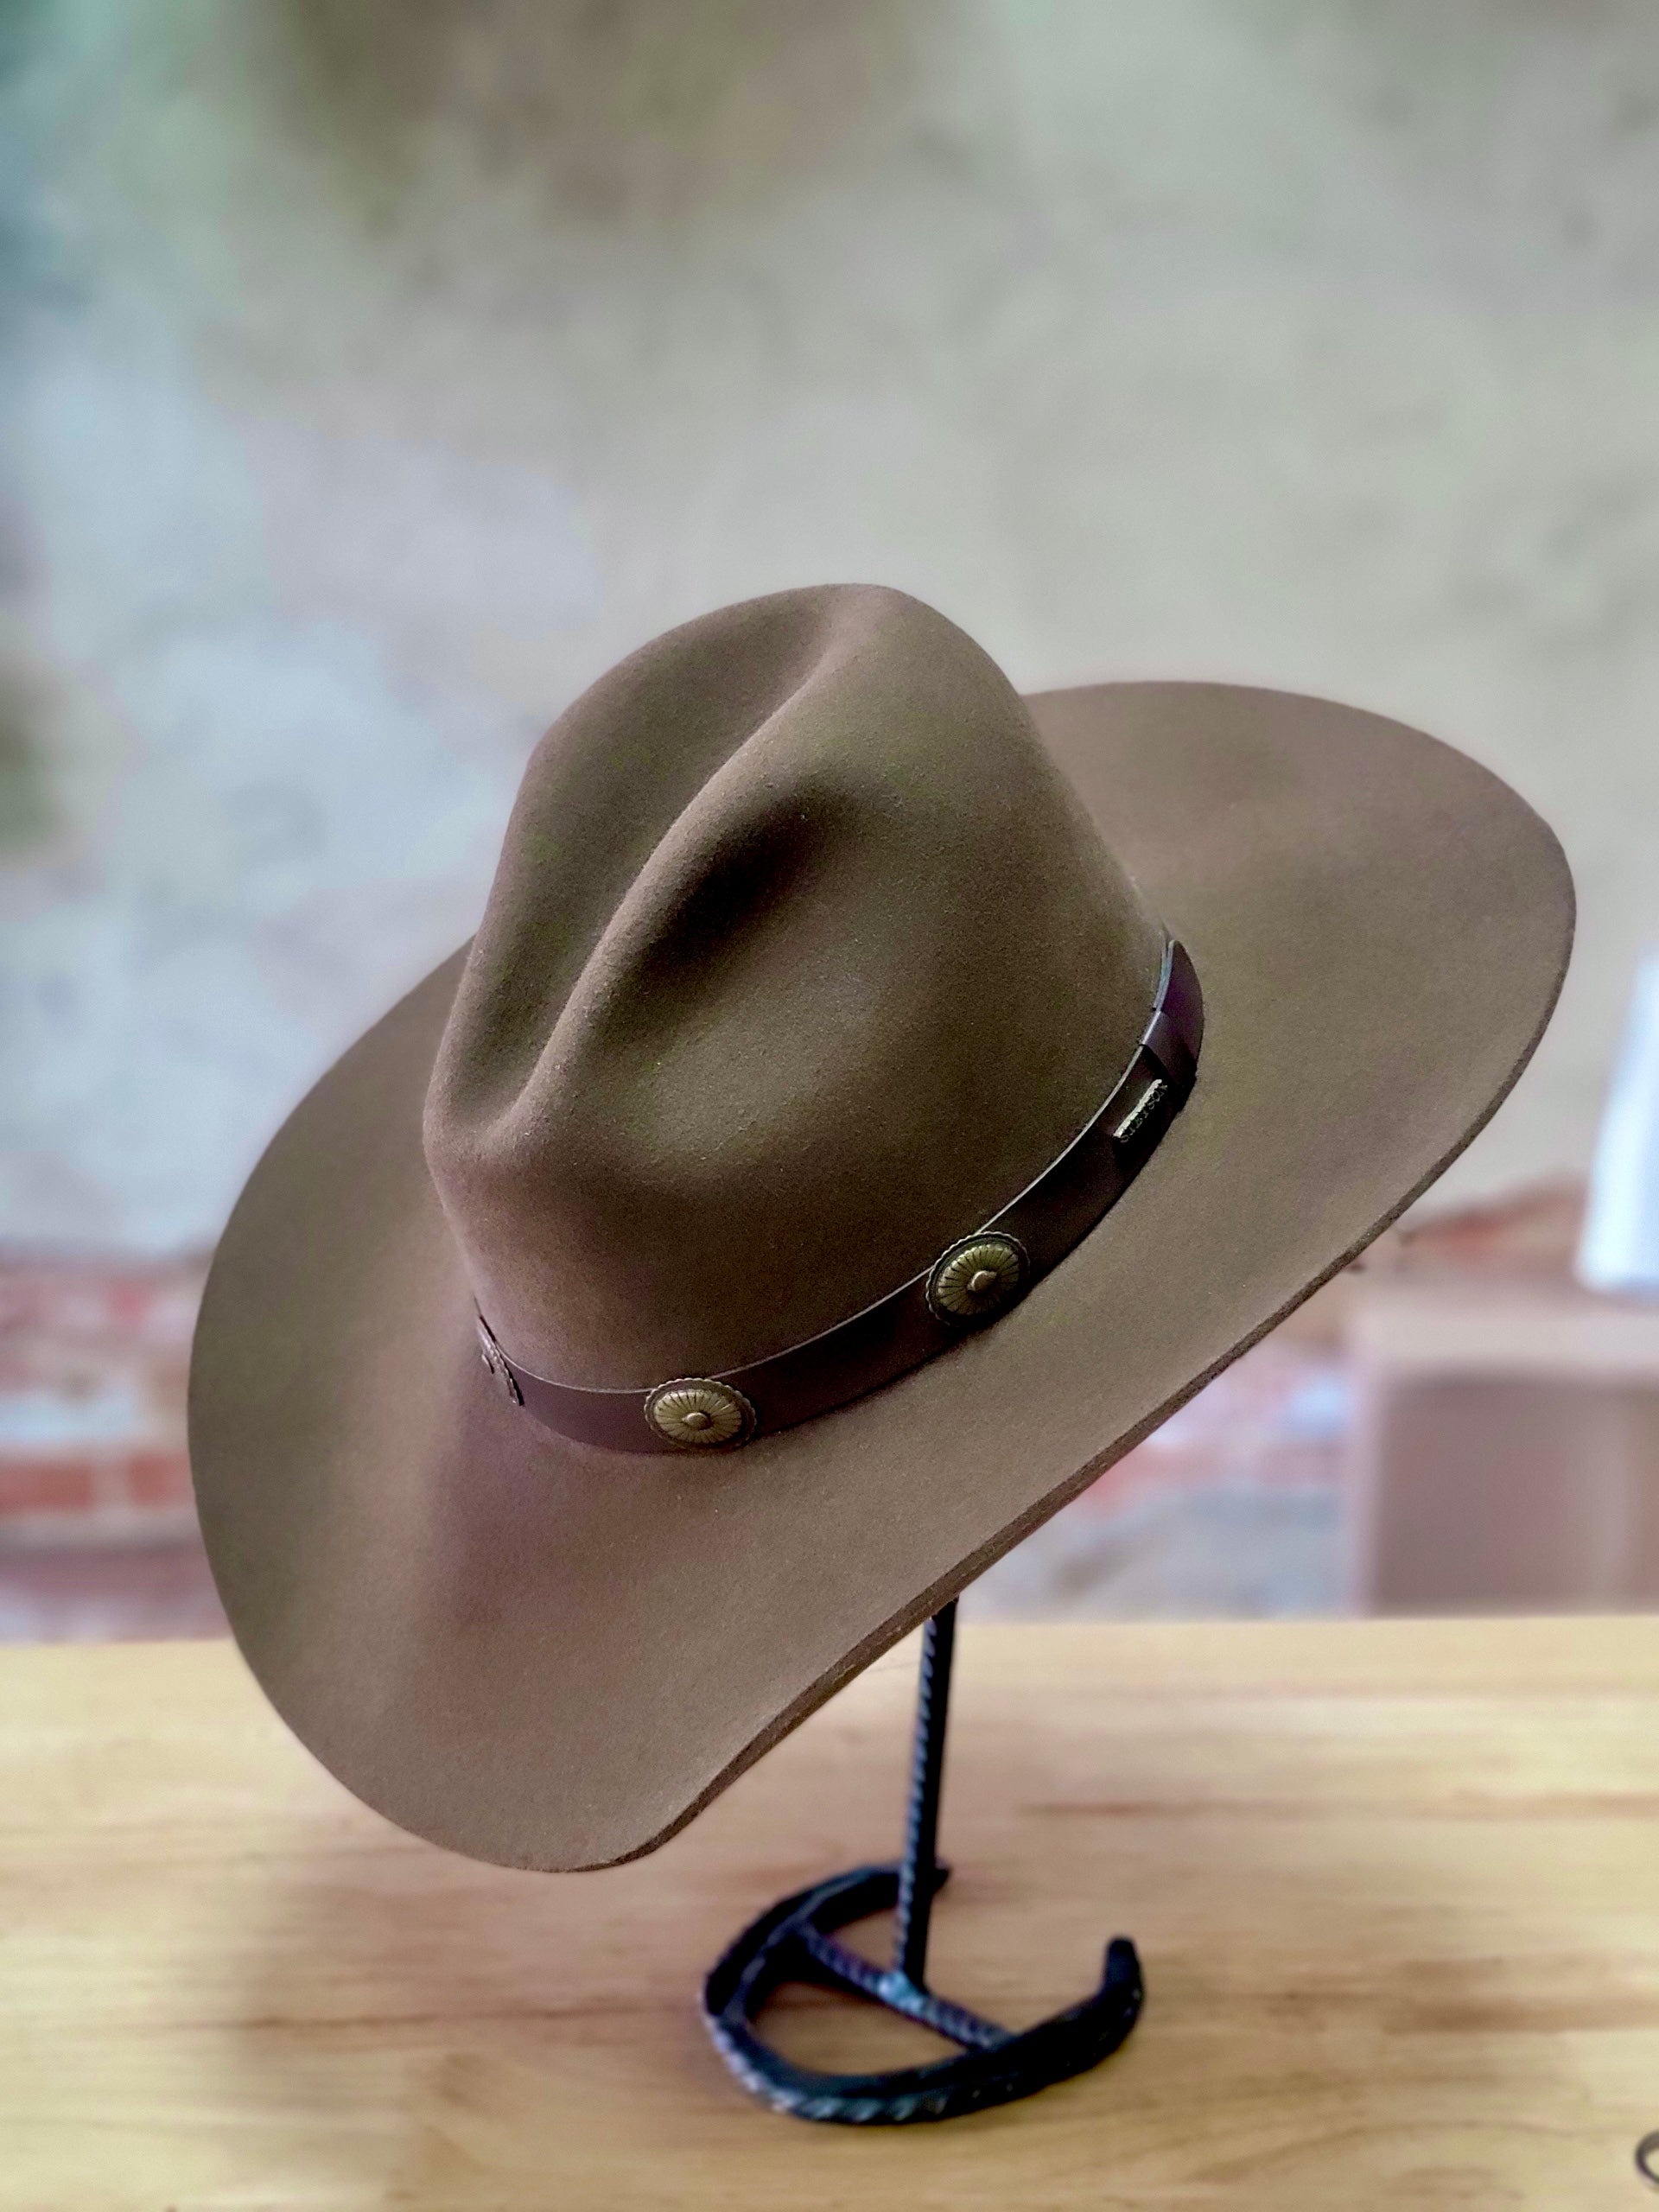 How to Clean a Felt Stetson Hat